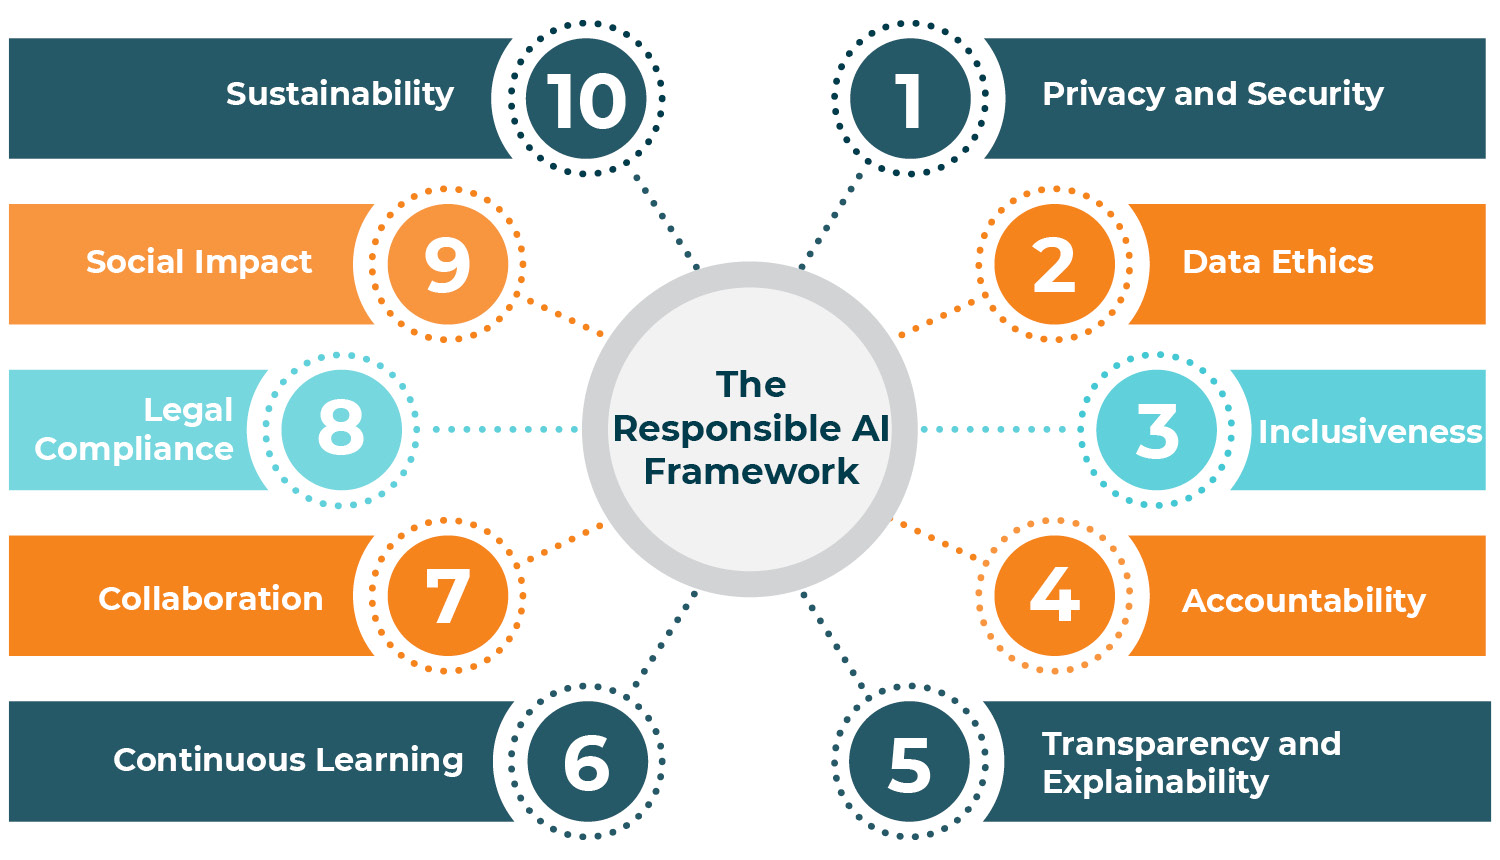 This image and the text below describe the Responsible AI Framework. 